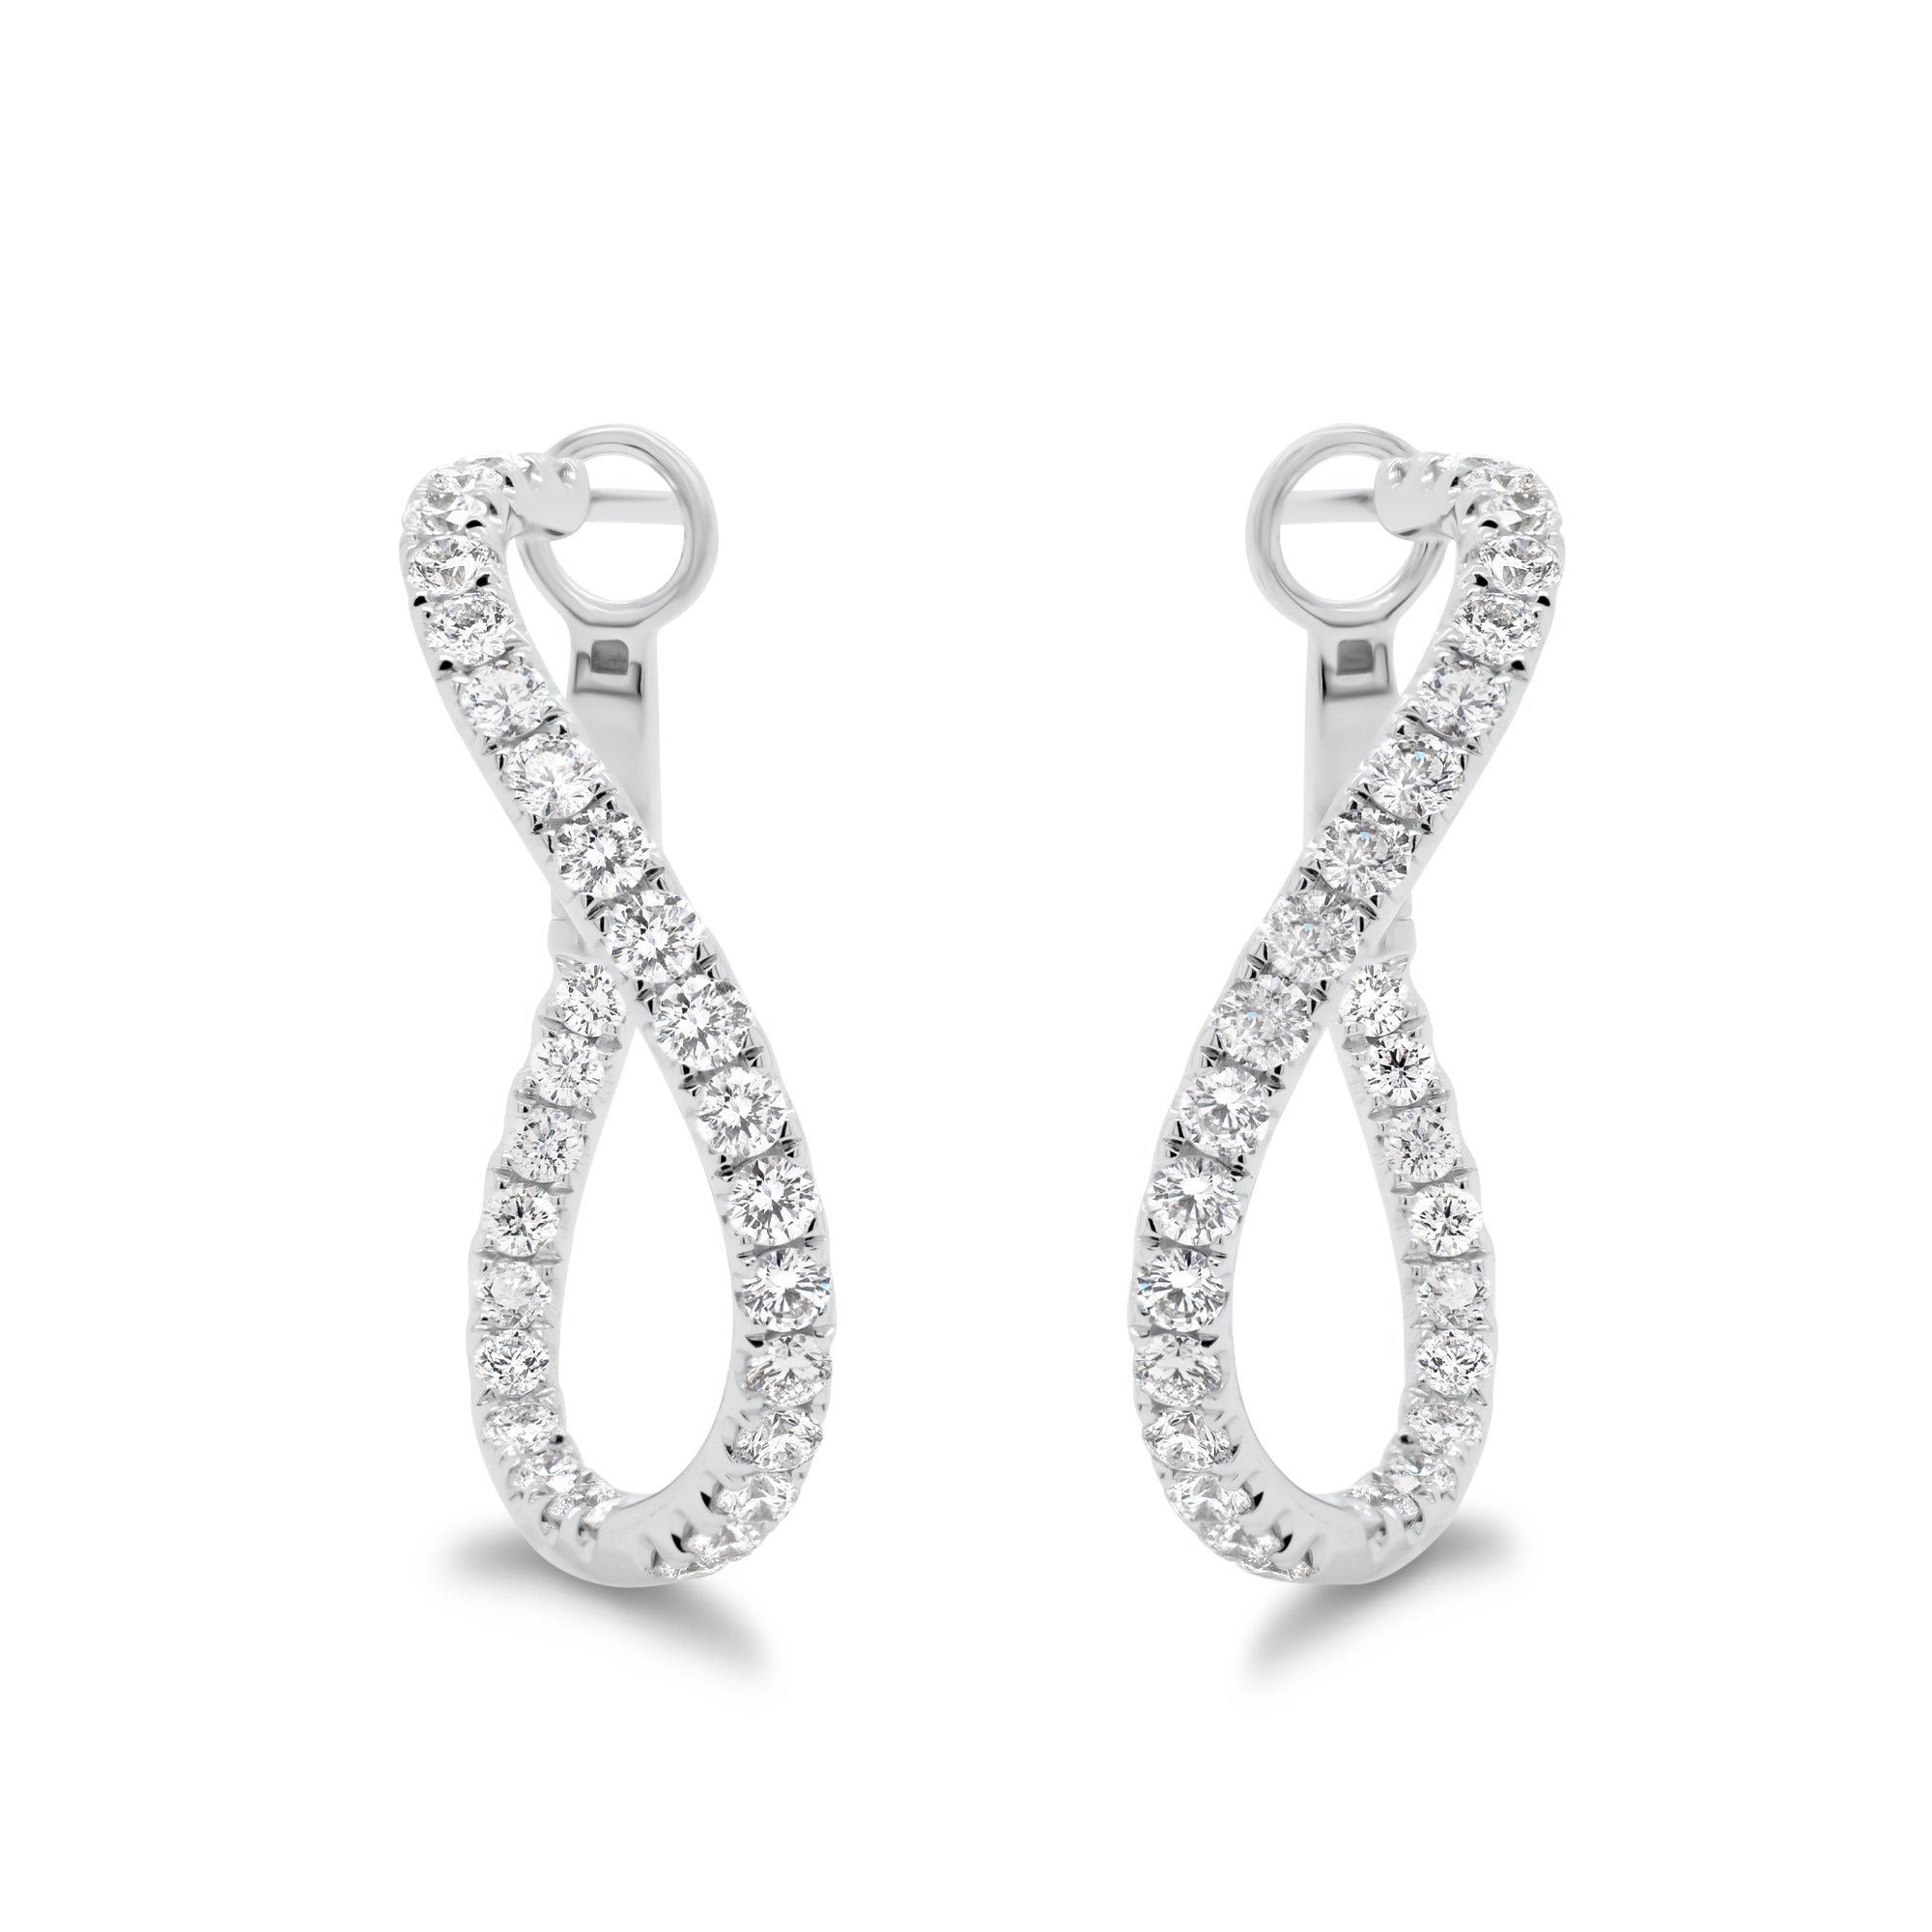 Small Diamond Twist Hoop Earrings -18K gold weighing 6.25 grams  -58 round diamonds totaling 1.78 carats